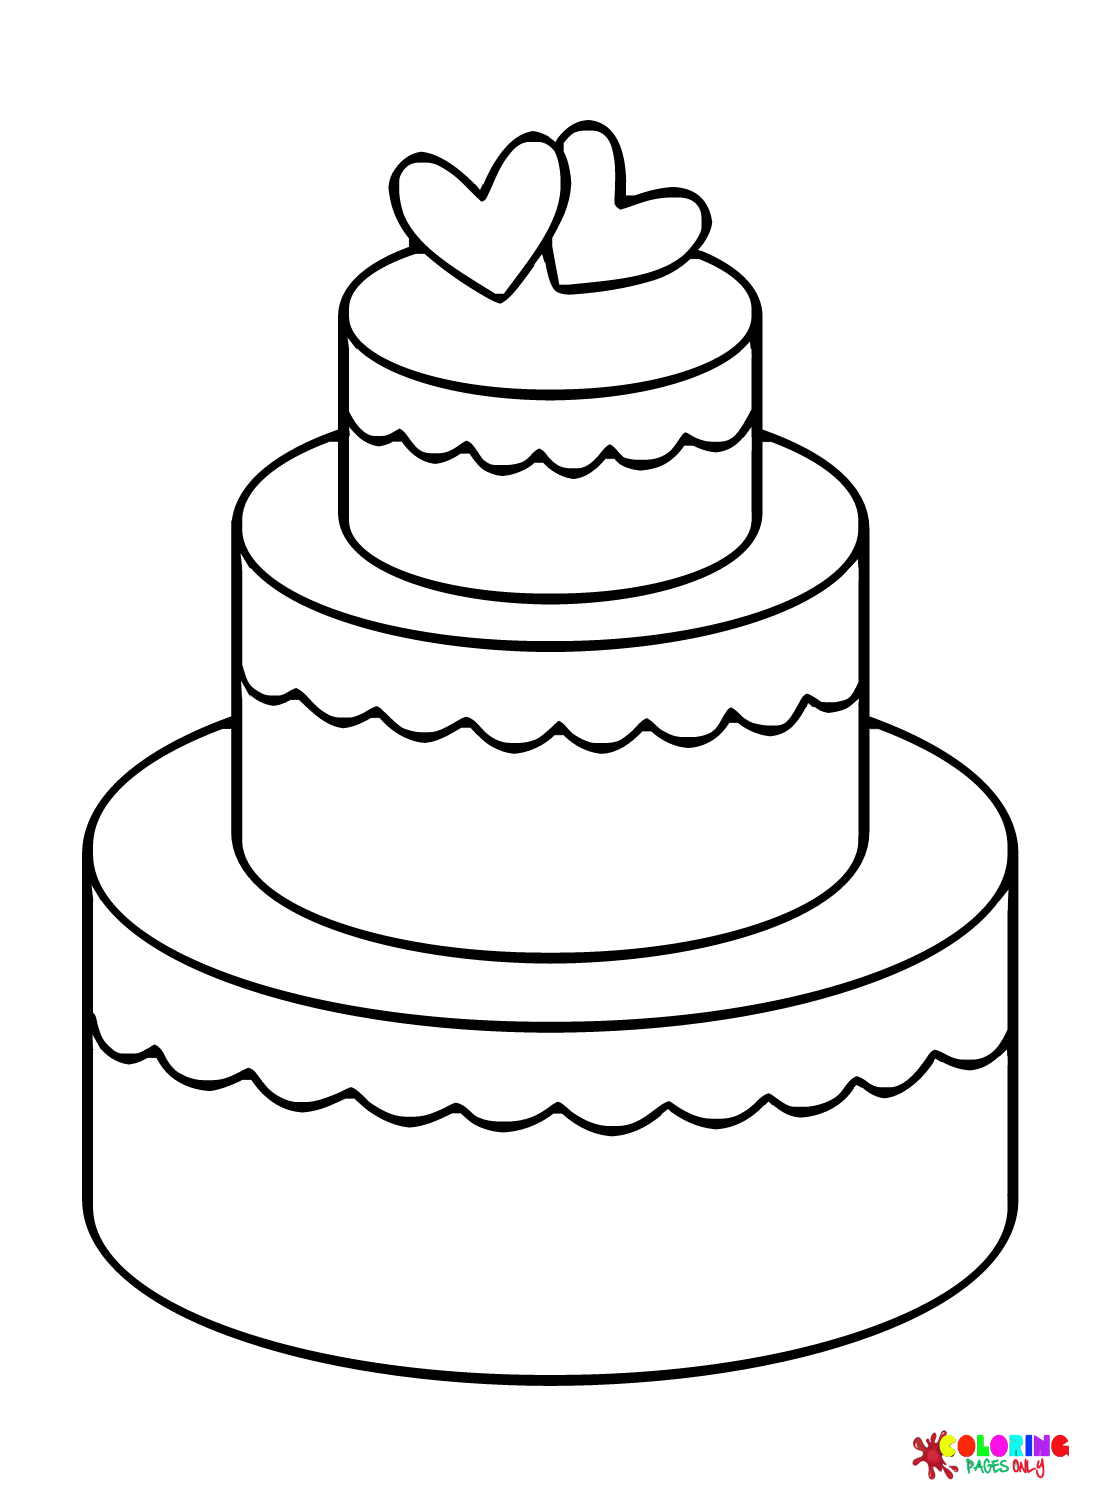 Printable Birthday Cake Coloring Pages | ColoringMe.com